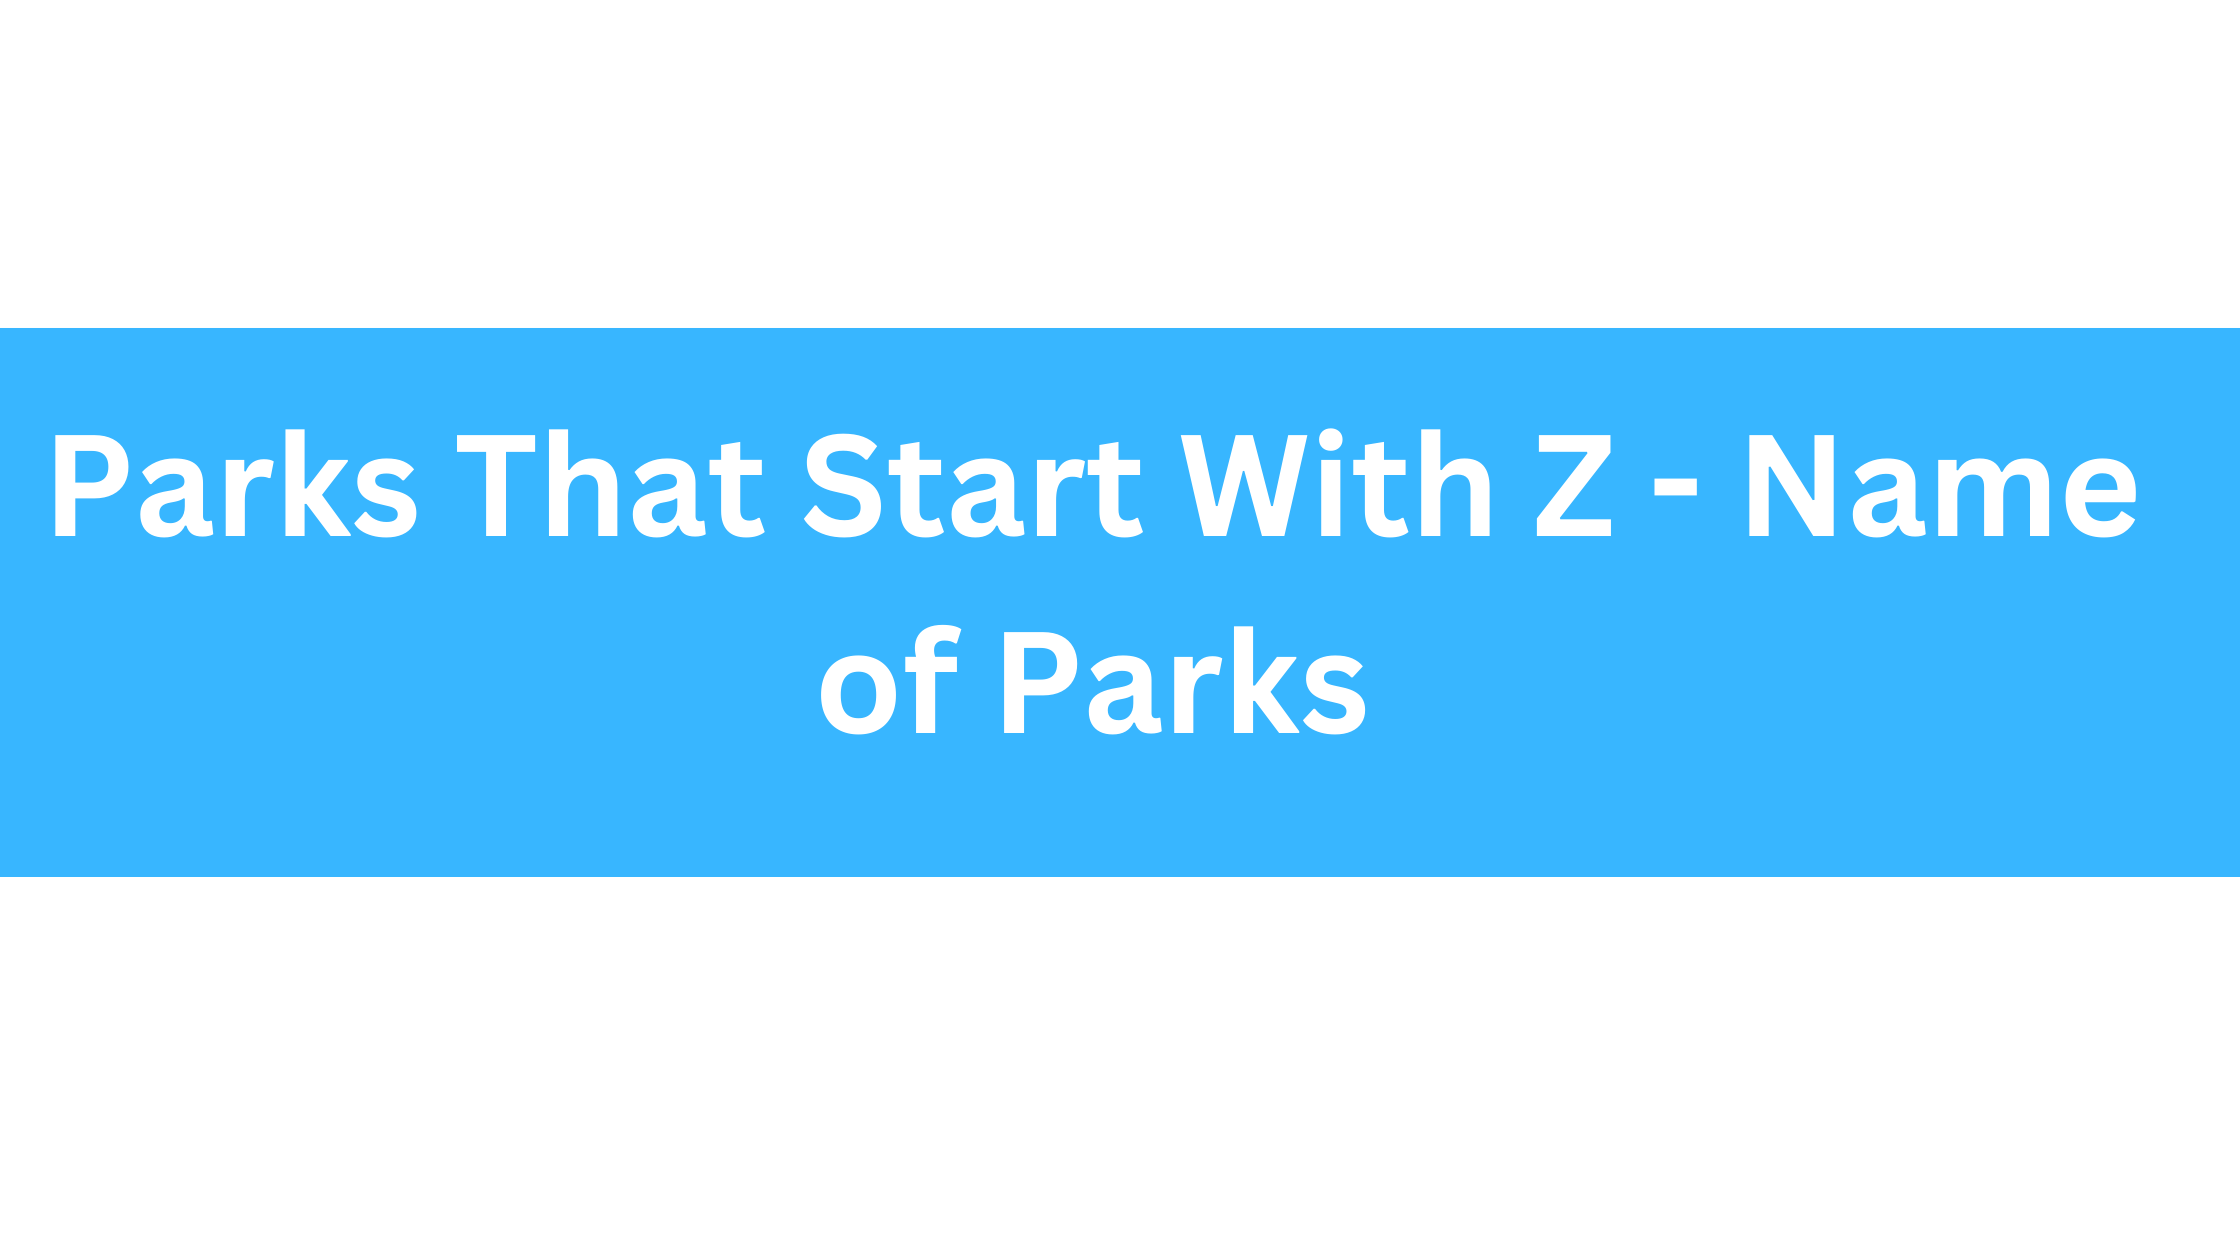 Parks That Start With Z